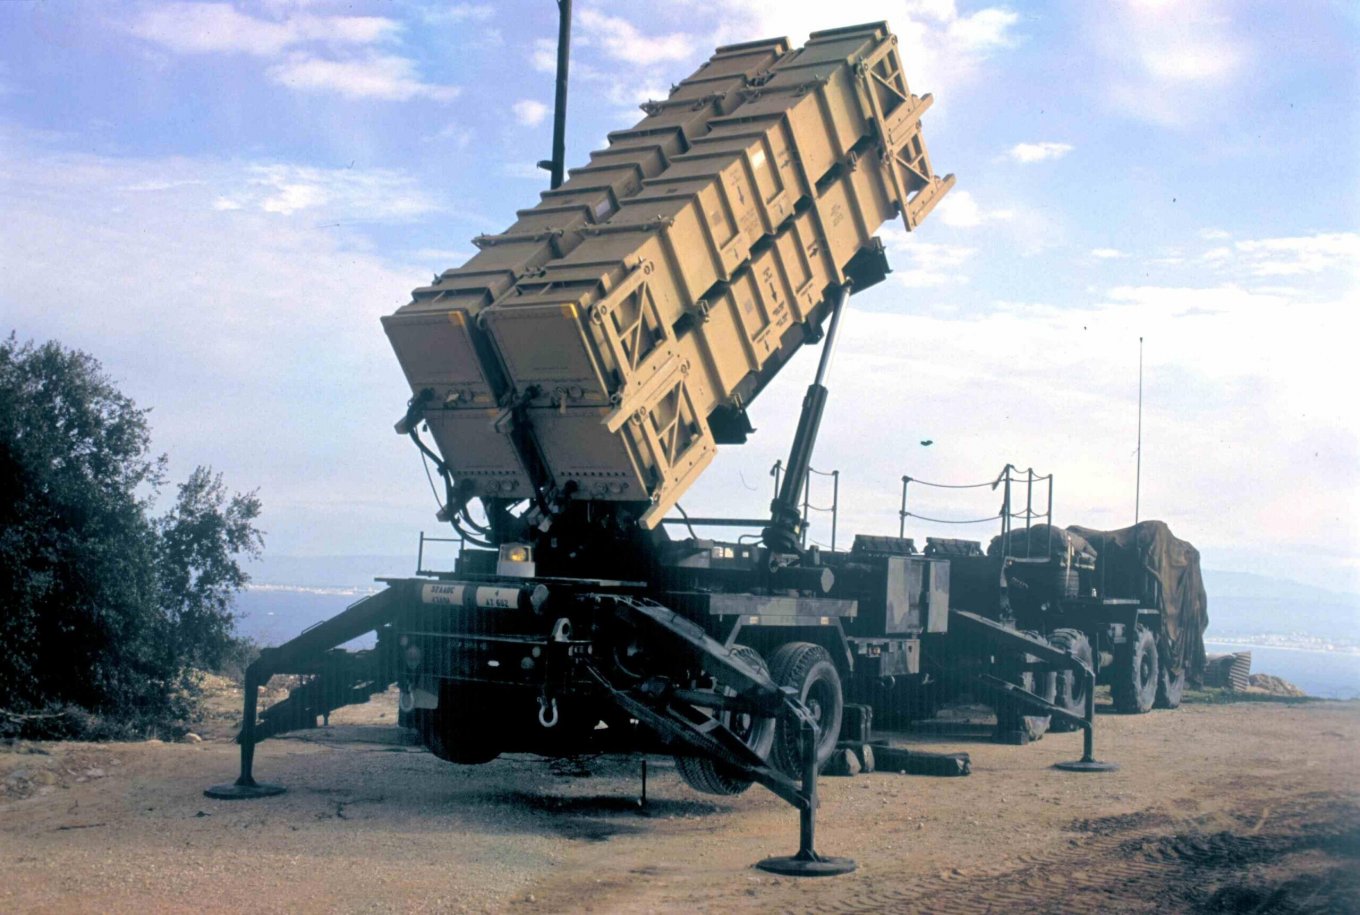 Defence Express / Position of the American Patriot missile system in Israel during Operation Desert Storm in 1991, photo by Noam Wind/ Photo credit: Israel Ministry of Defense Archive